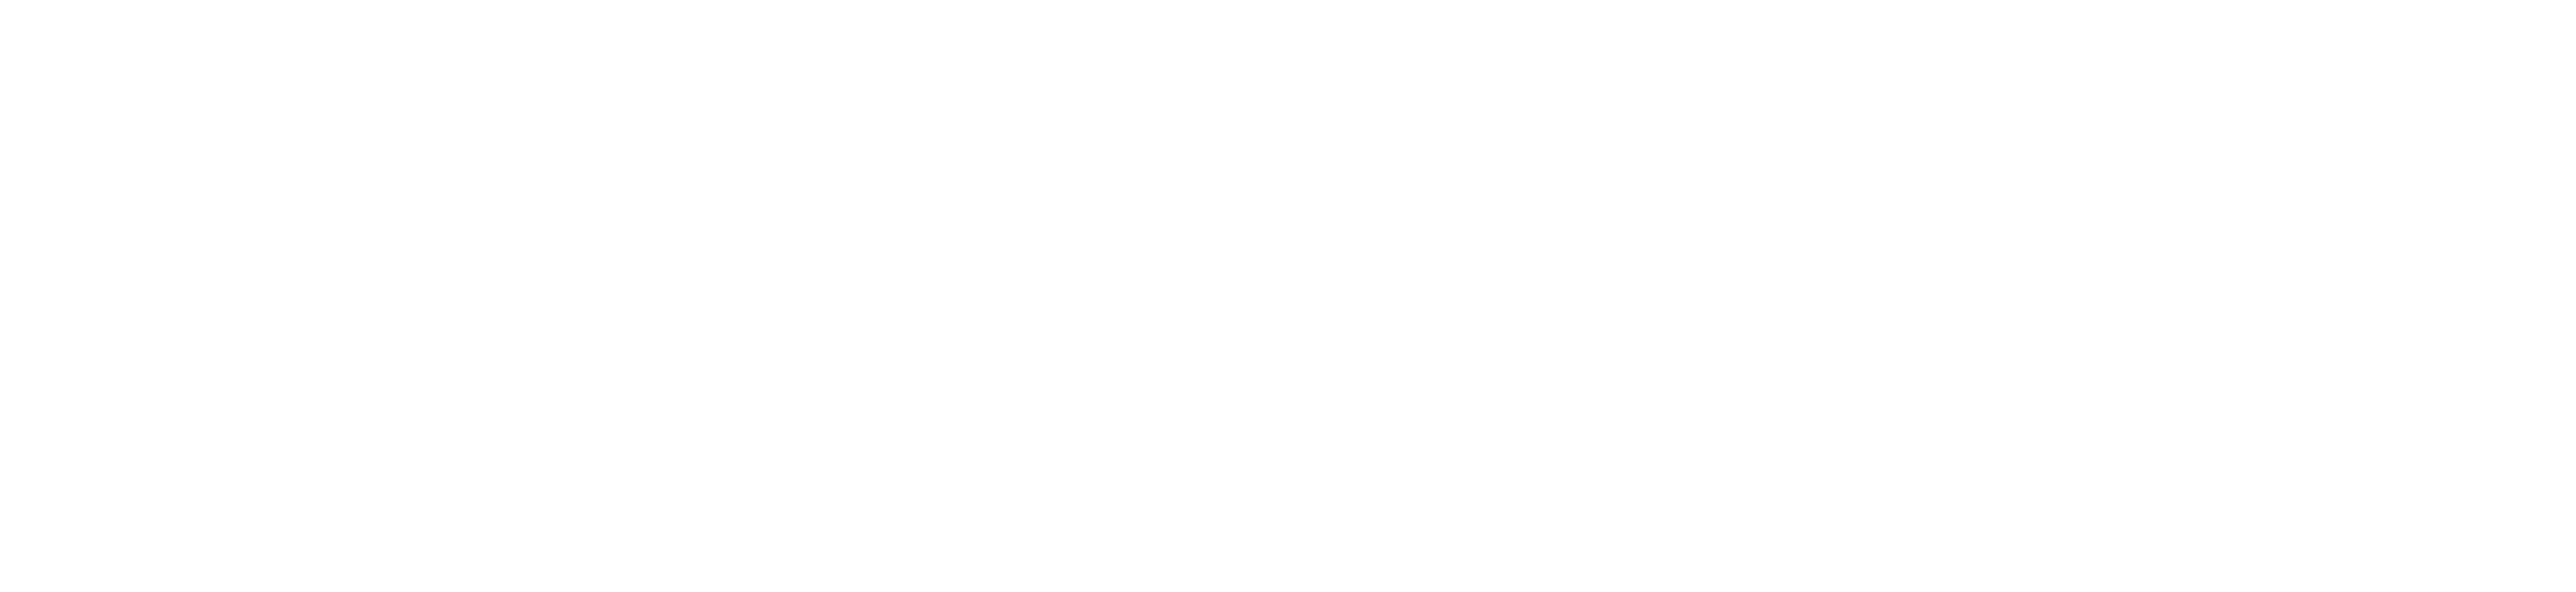 ACS Publications Forum: Journal of Agricultural and Food Chemistry